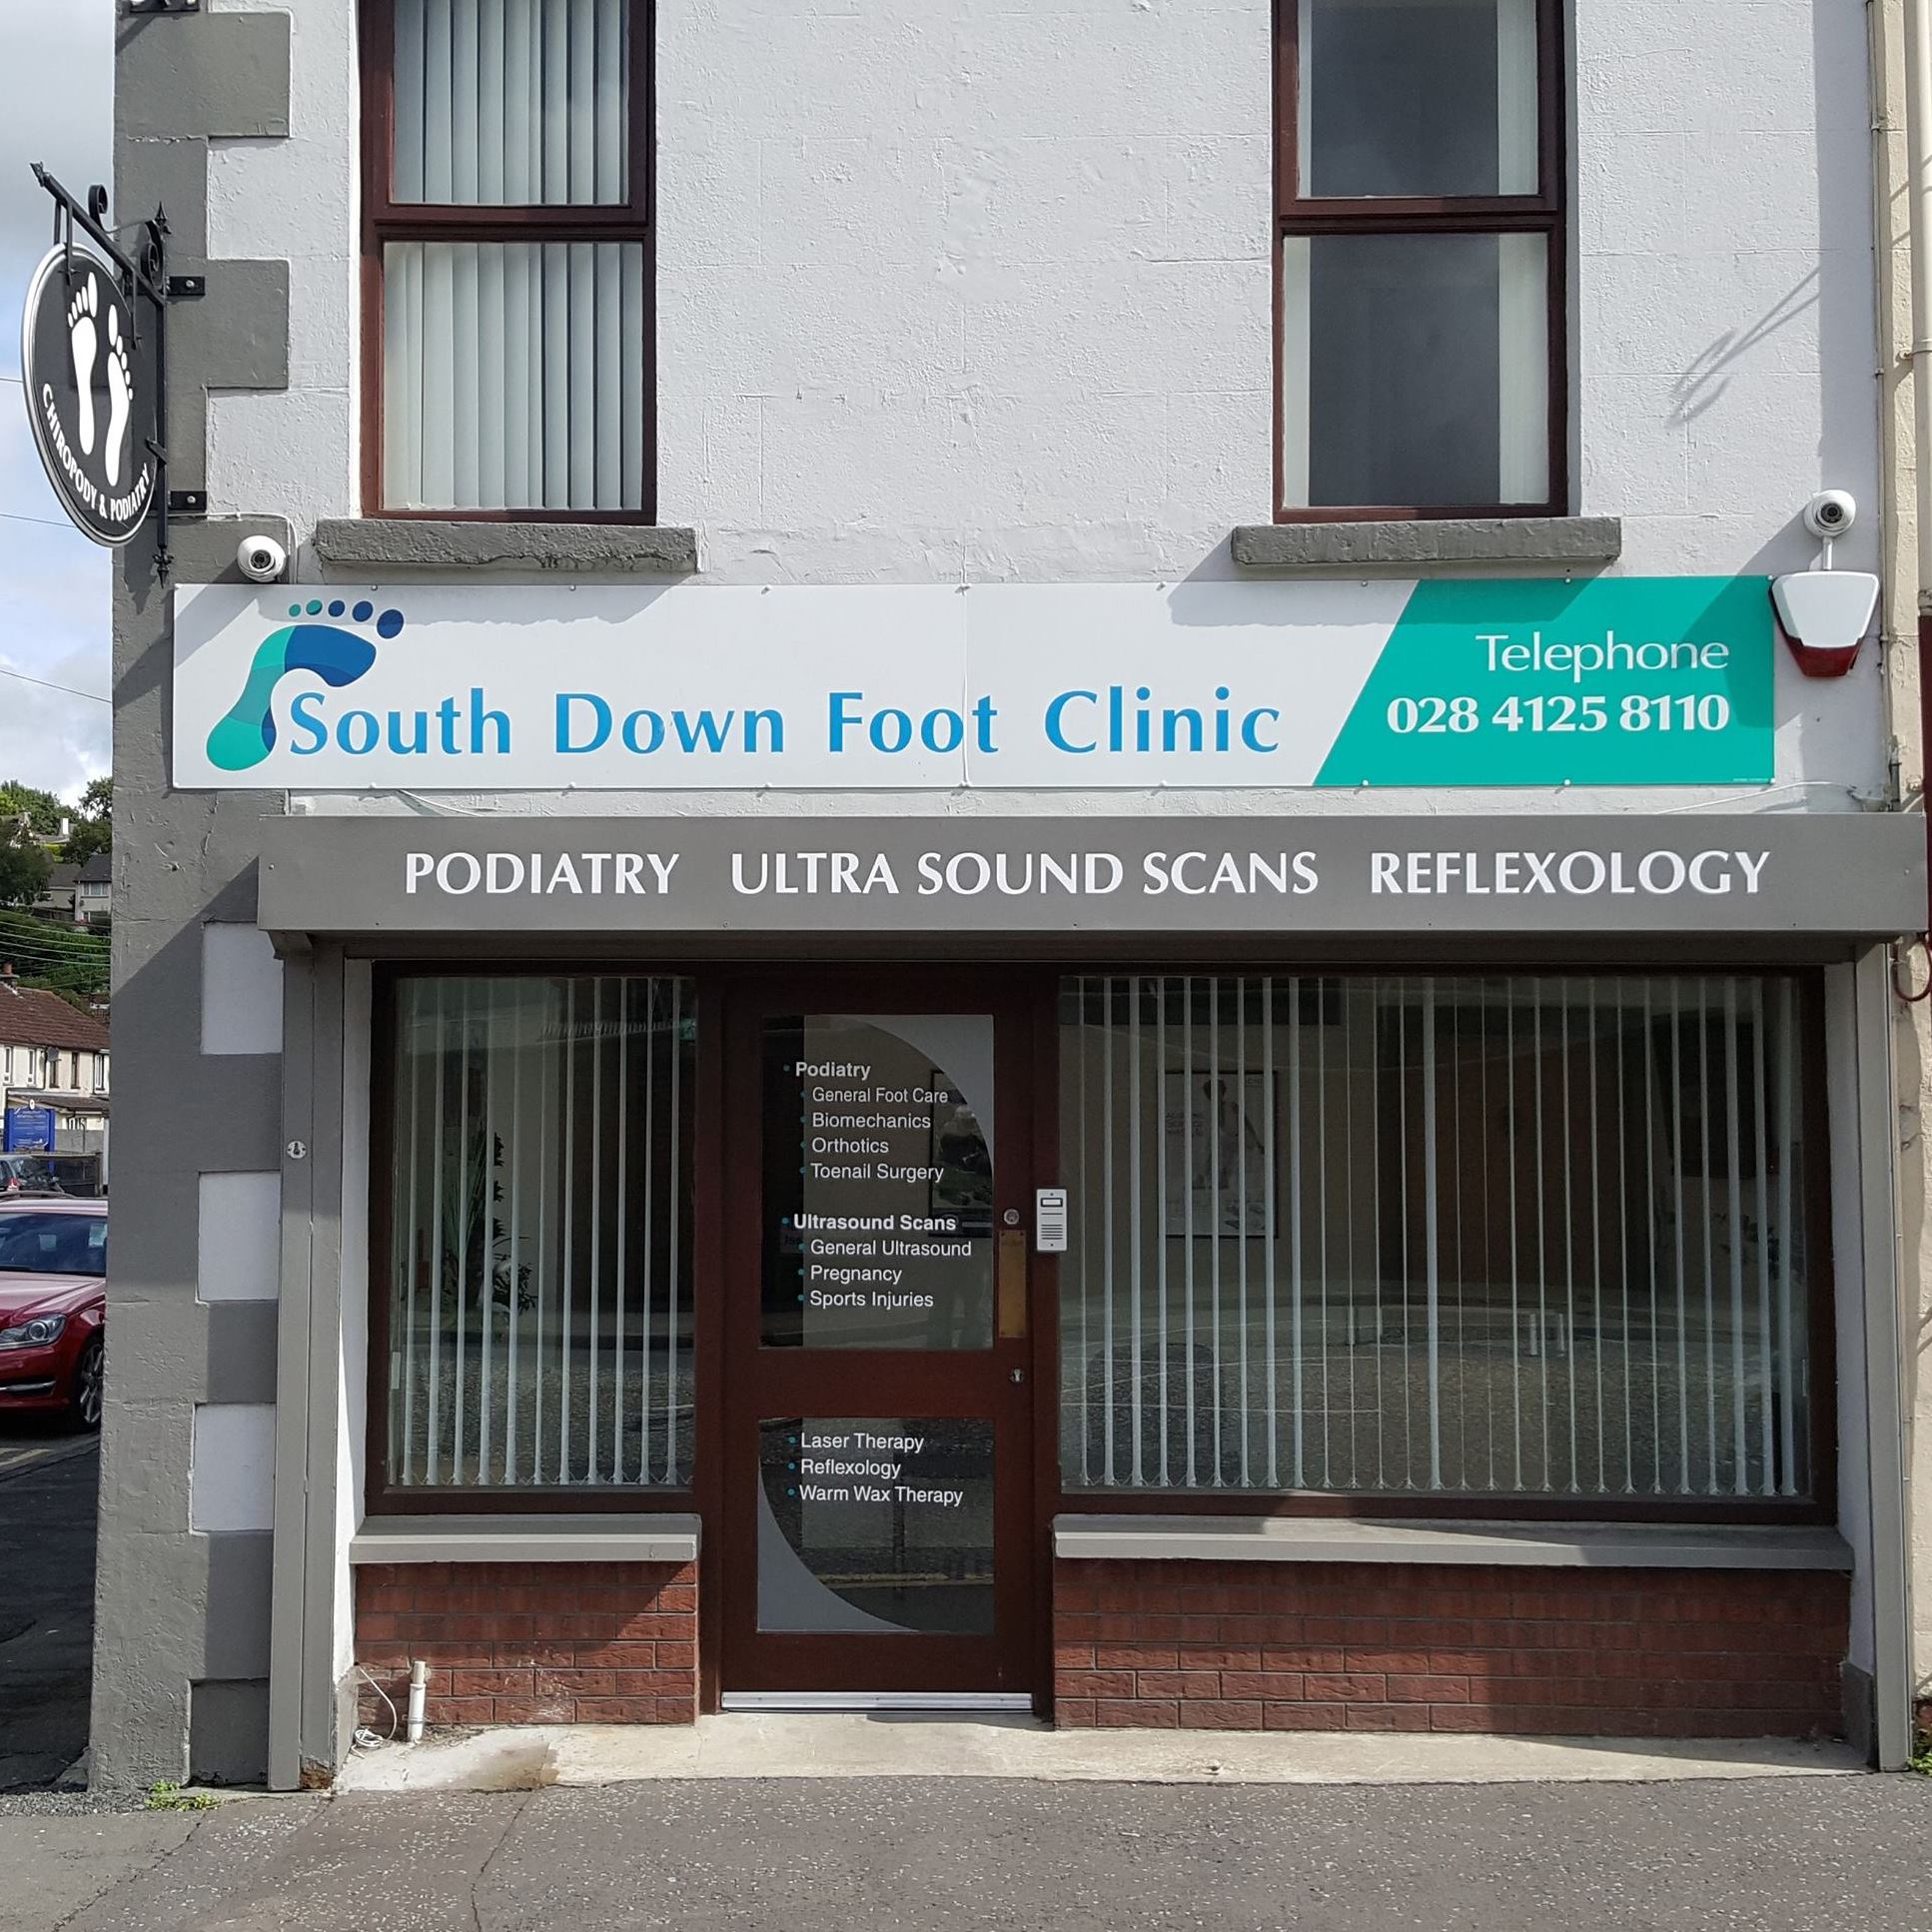 South Down Foot Clinic